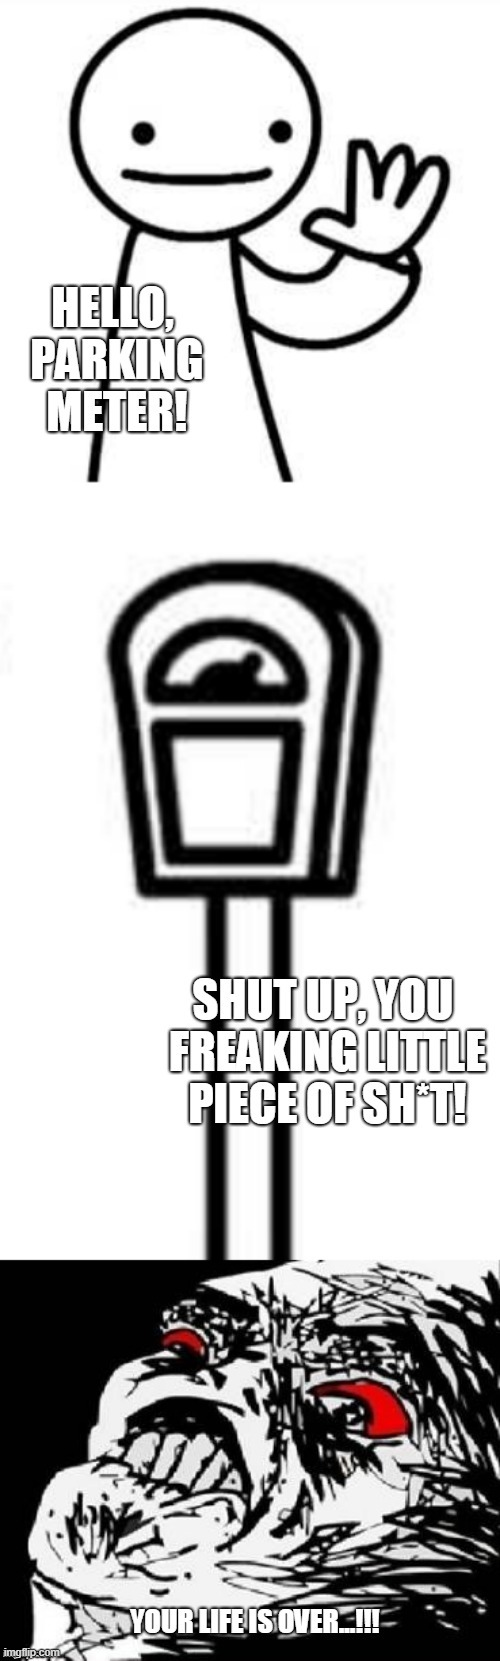 Hello, Parking B*tch! | image tagged in hello,parking meter,rage,bitch,shut up,face | made w/ Imgflip meme maker